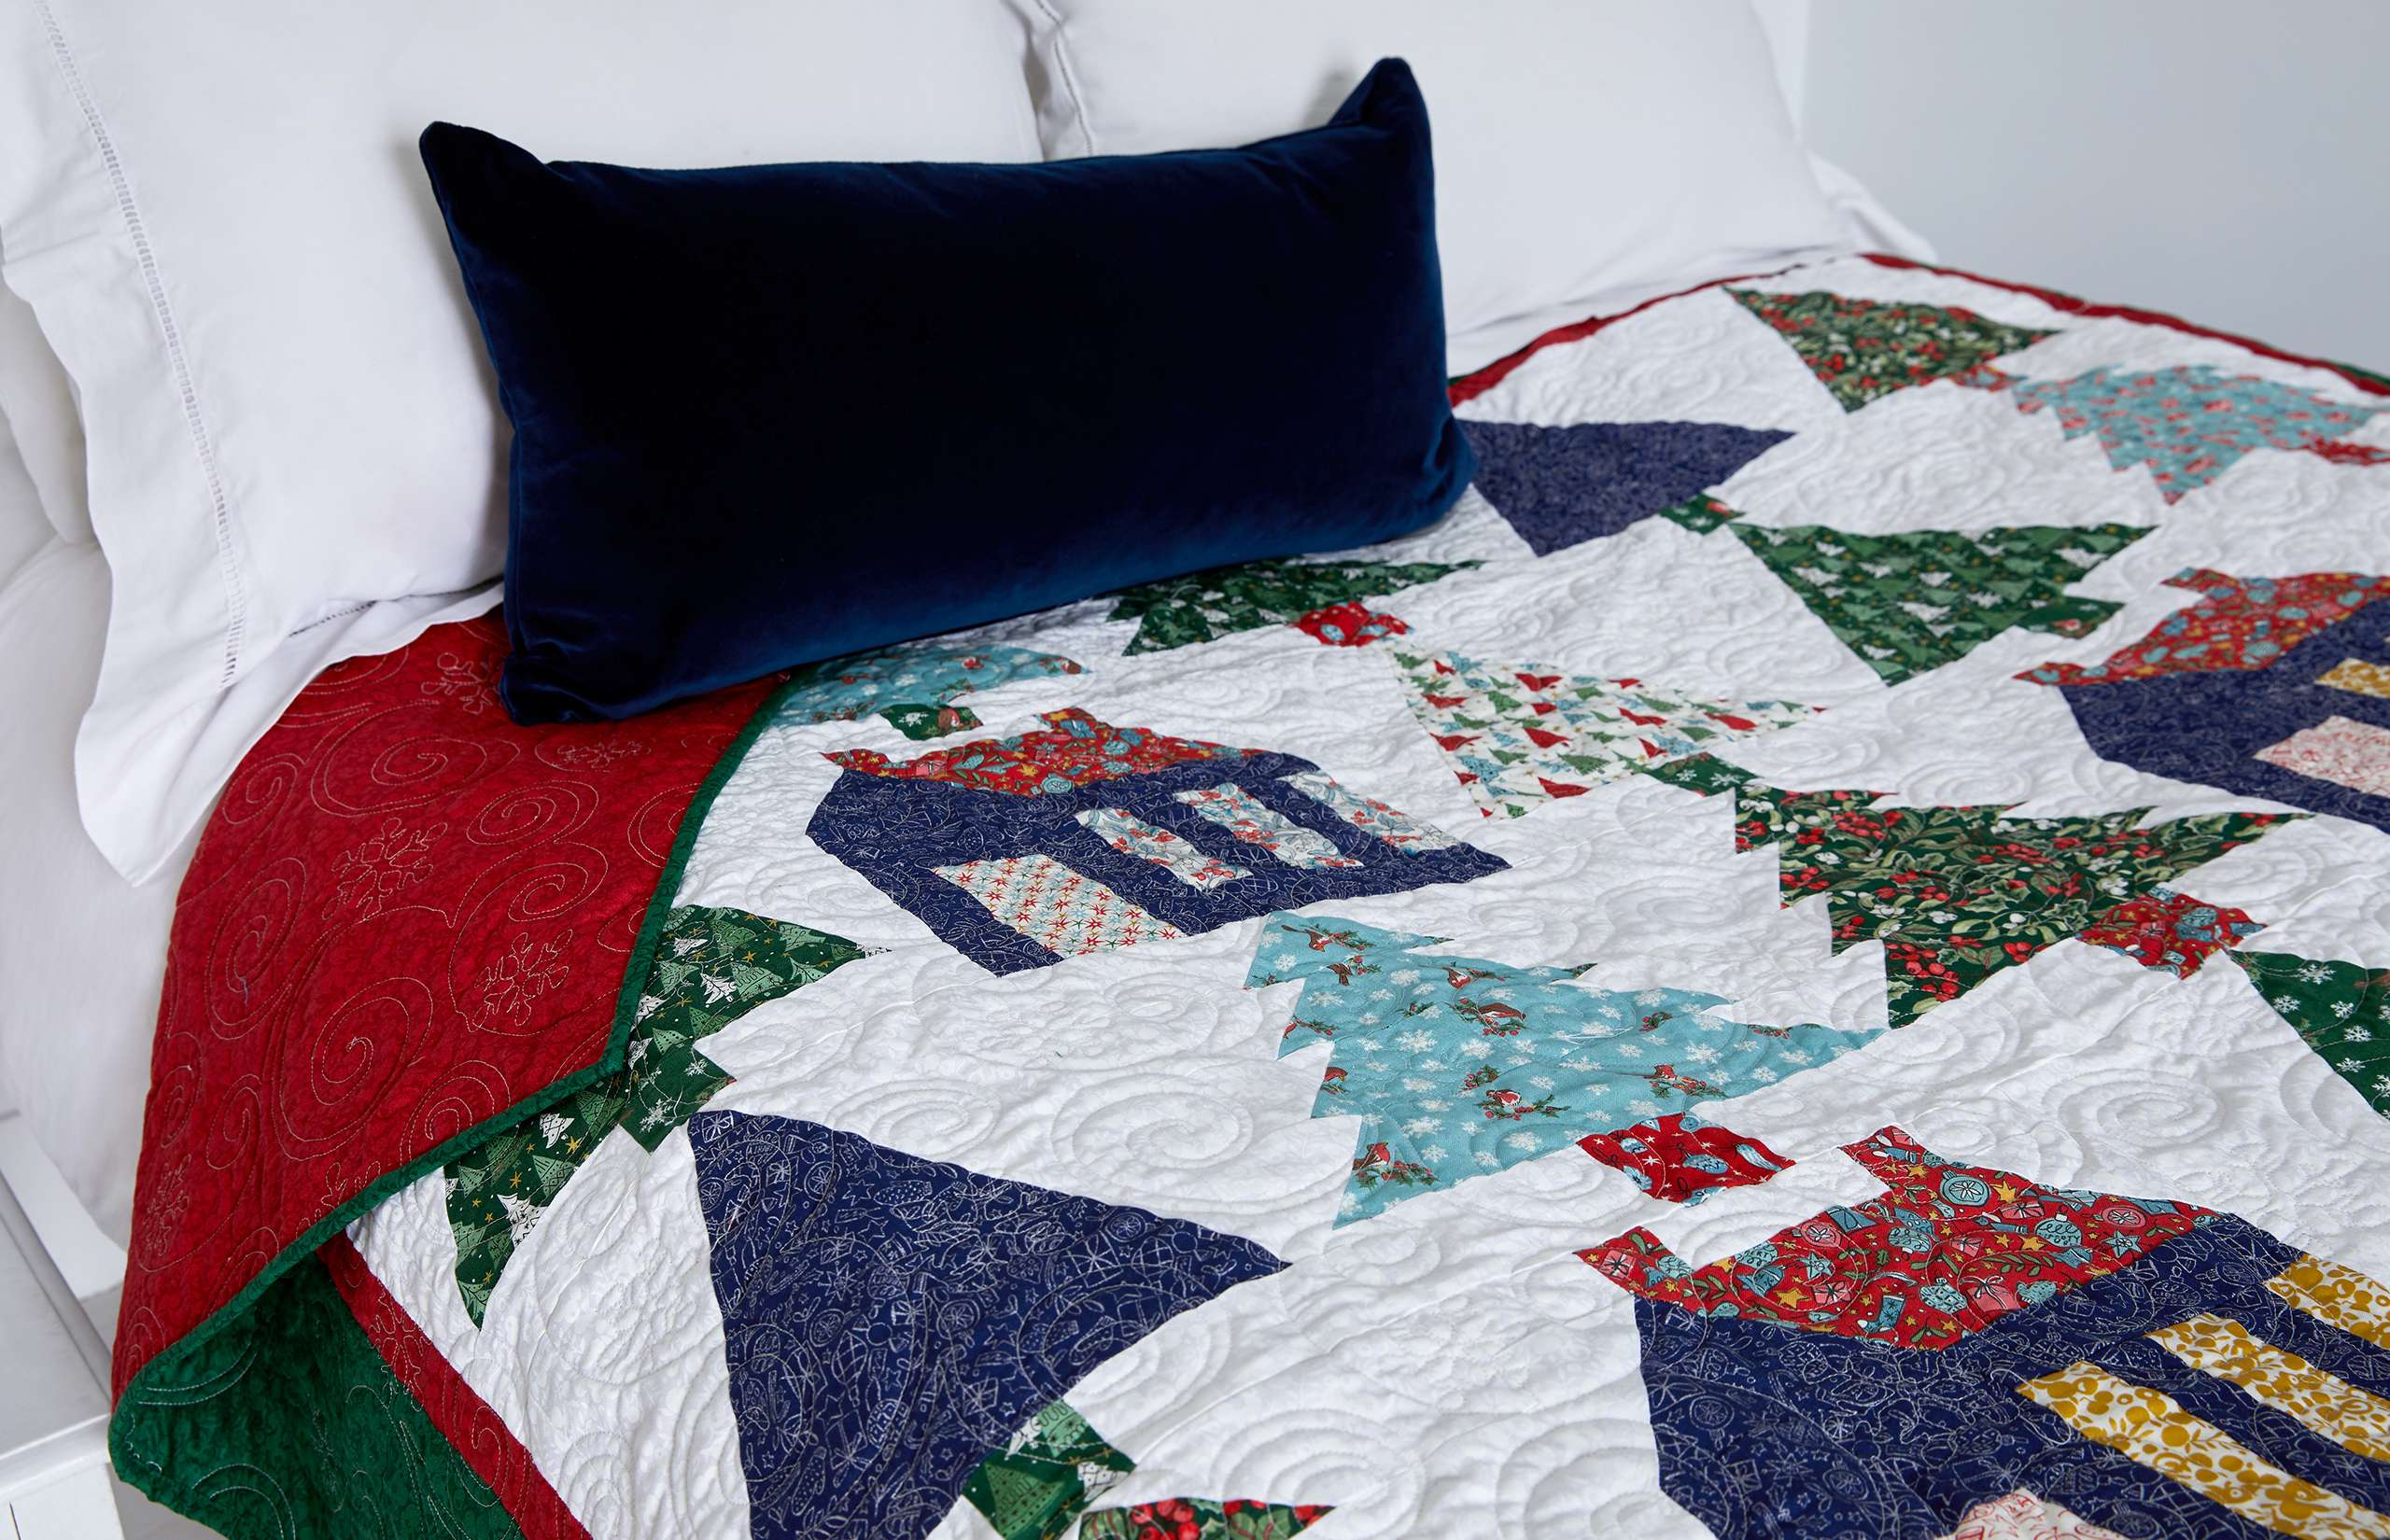 The 2020 Festive Quilt Project